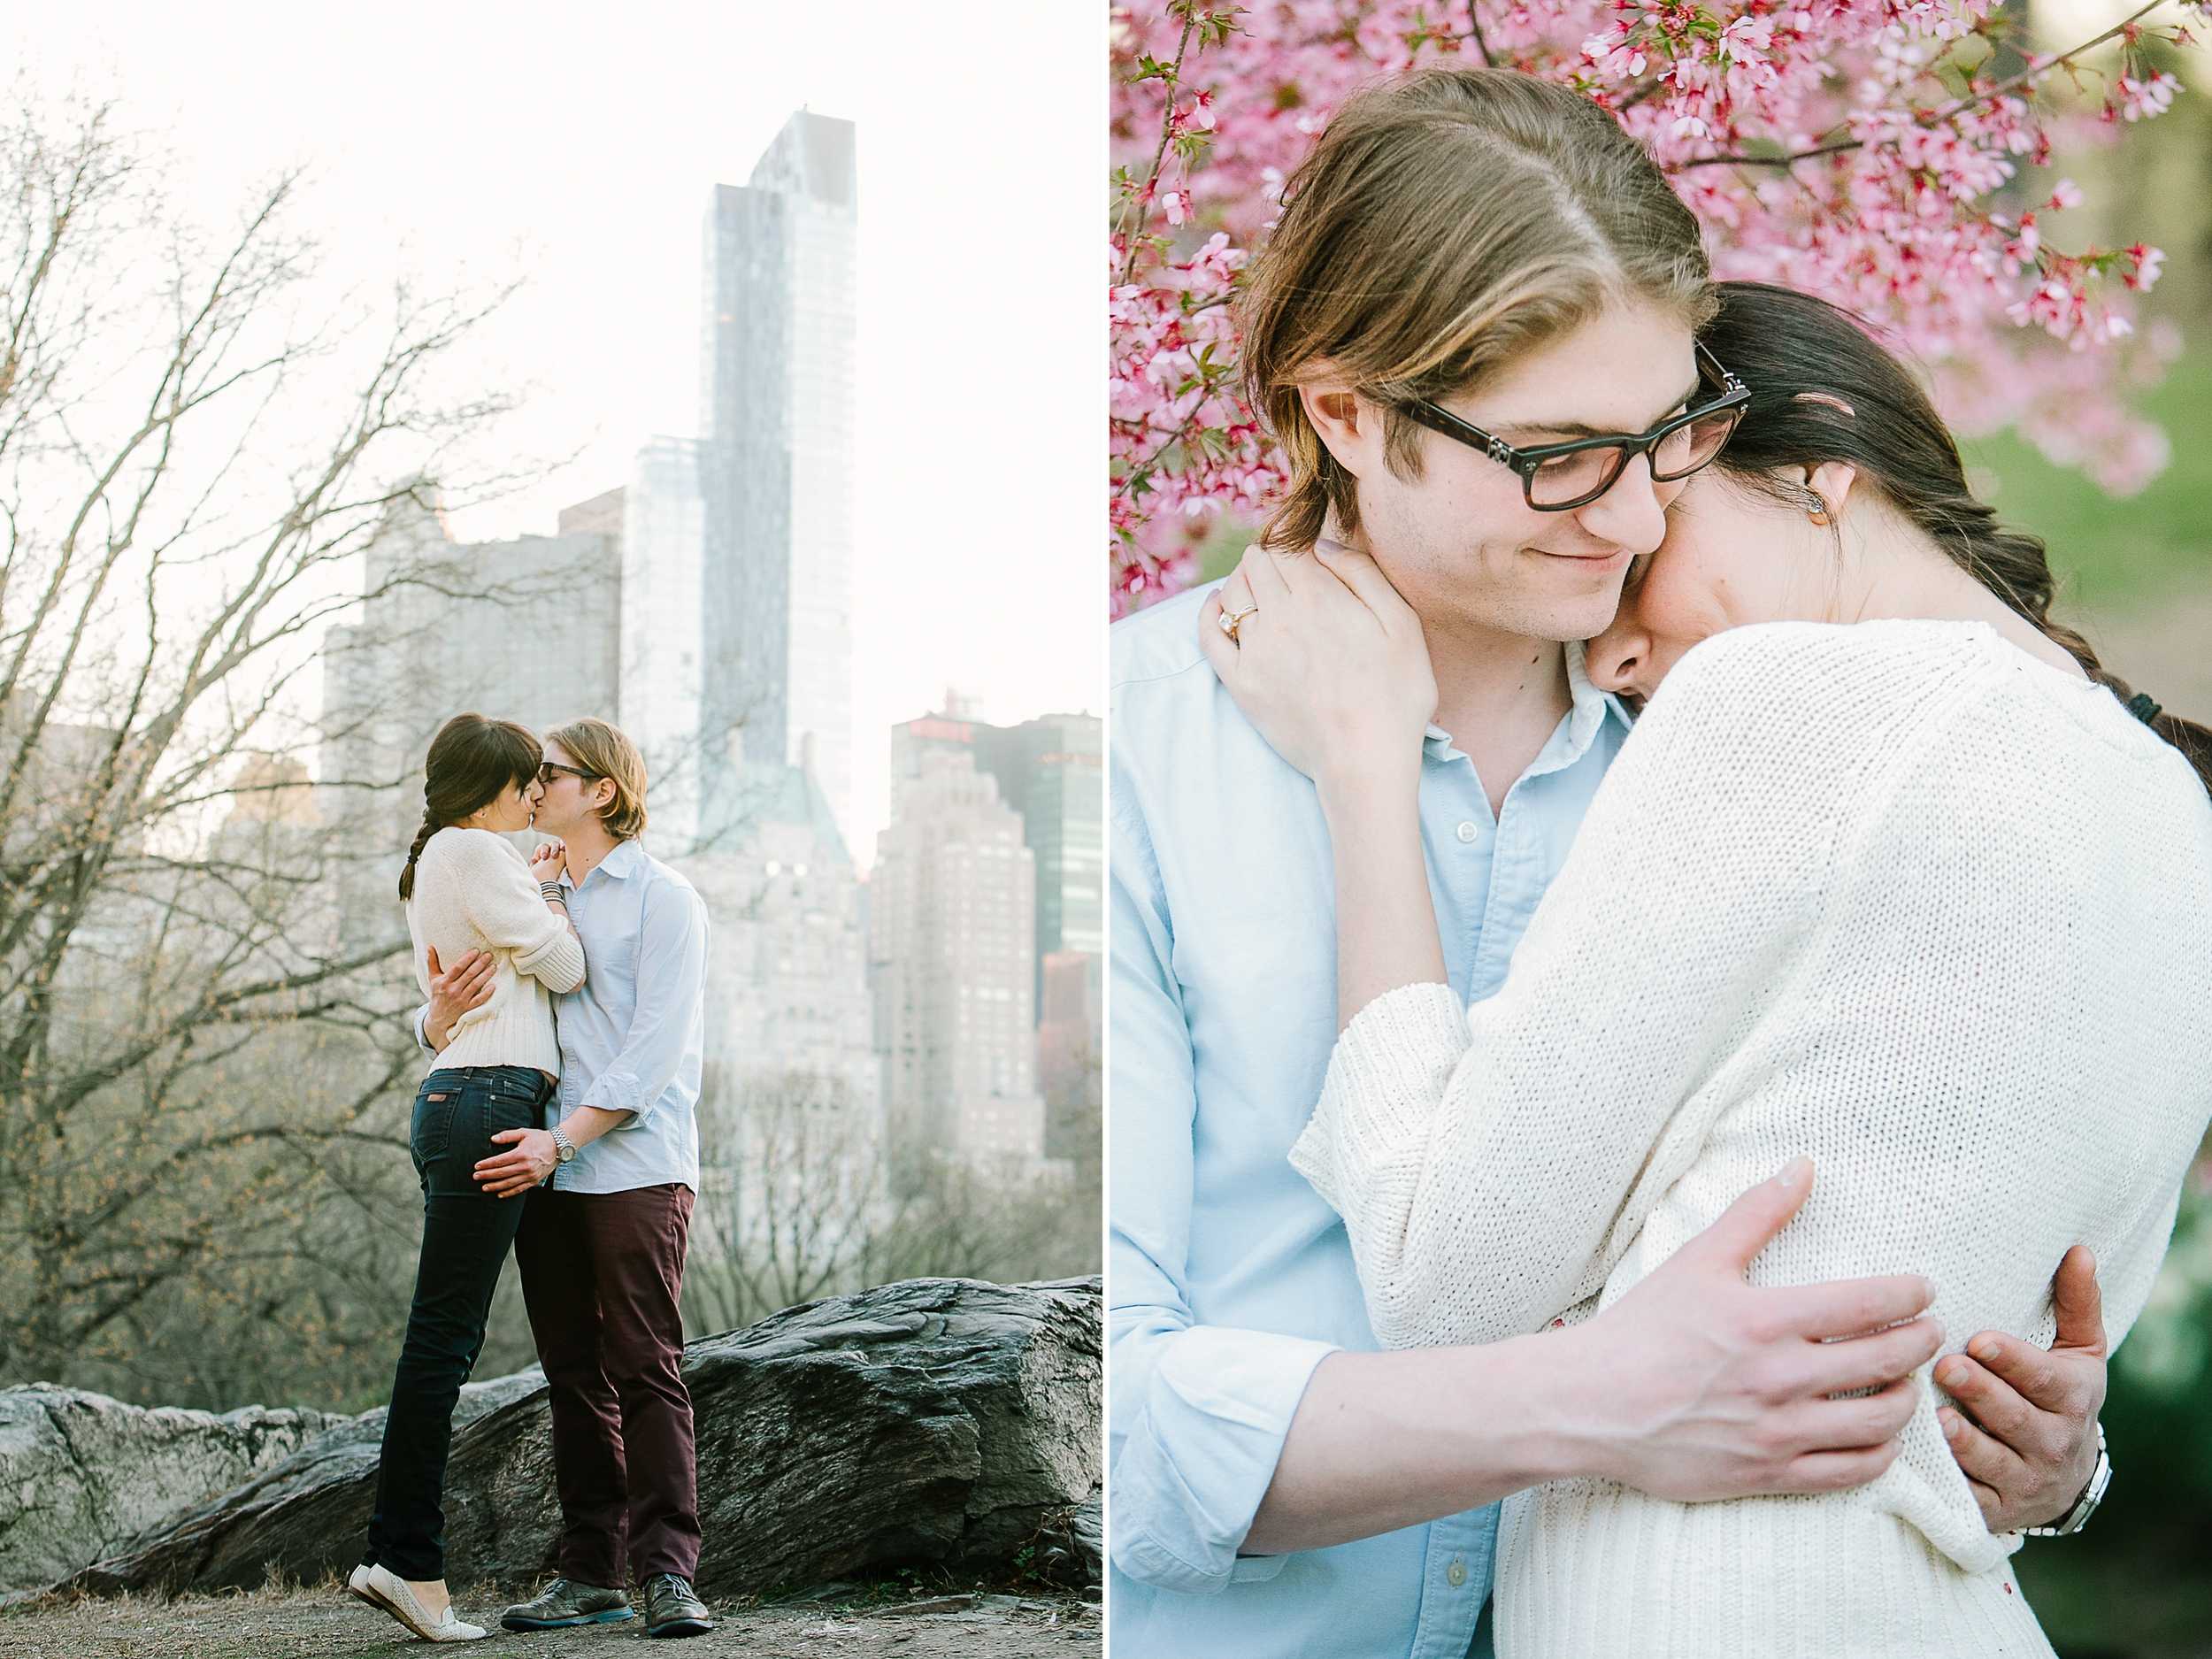 Central Park spring engagement session by Tanya Isaeva Photography